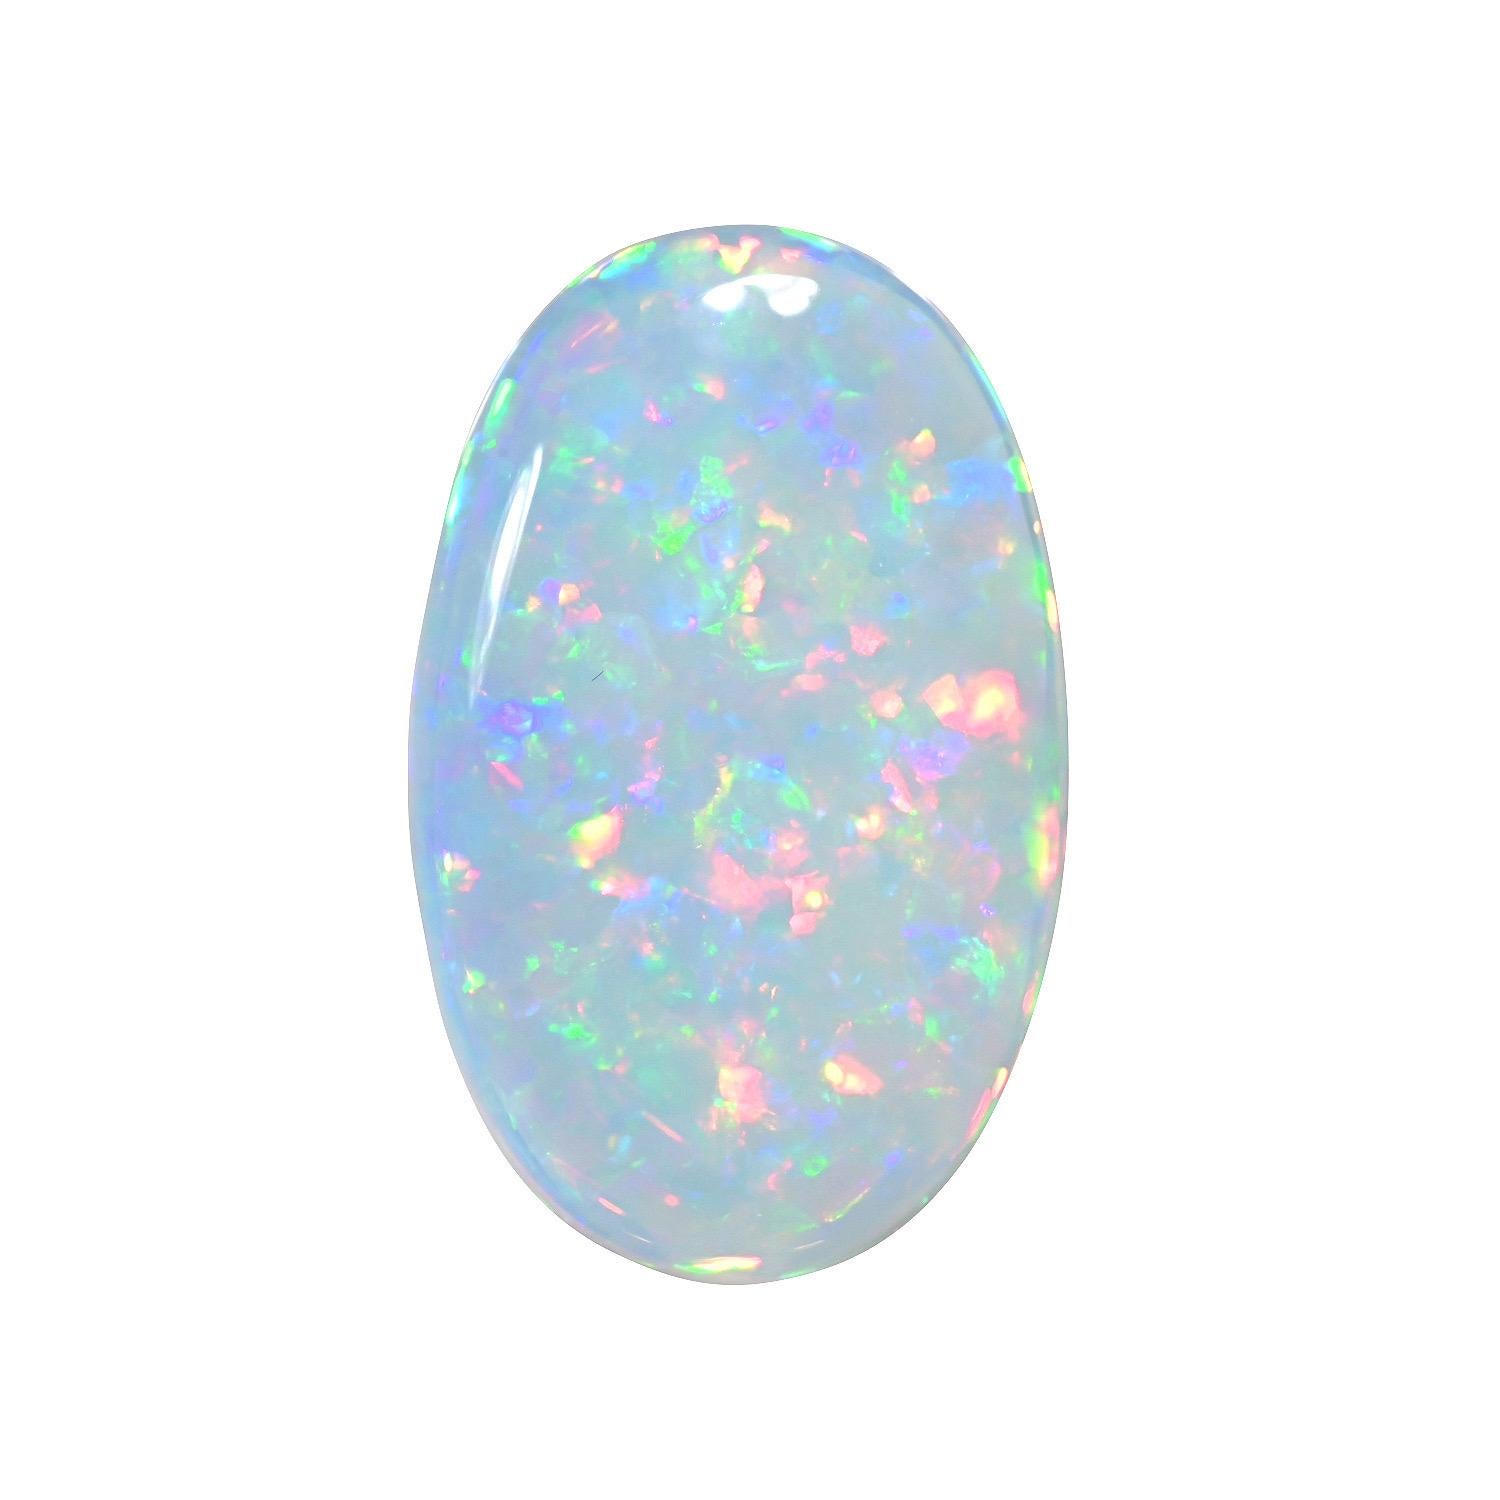 Natural 19.17 carat rectangular oval Ethiopian Opal loose gemstone, offered unmounted to someone very special.
Returns are accepted and paid by us within 7 days of delivery.
We offer supreme custom jewelry work upon request. Please contact us for